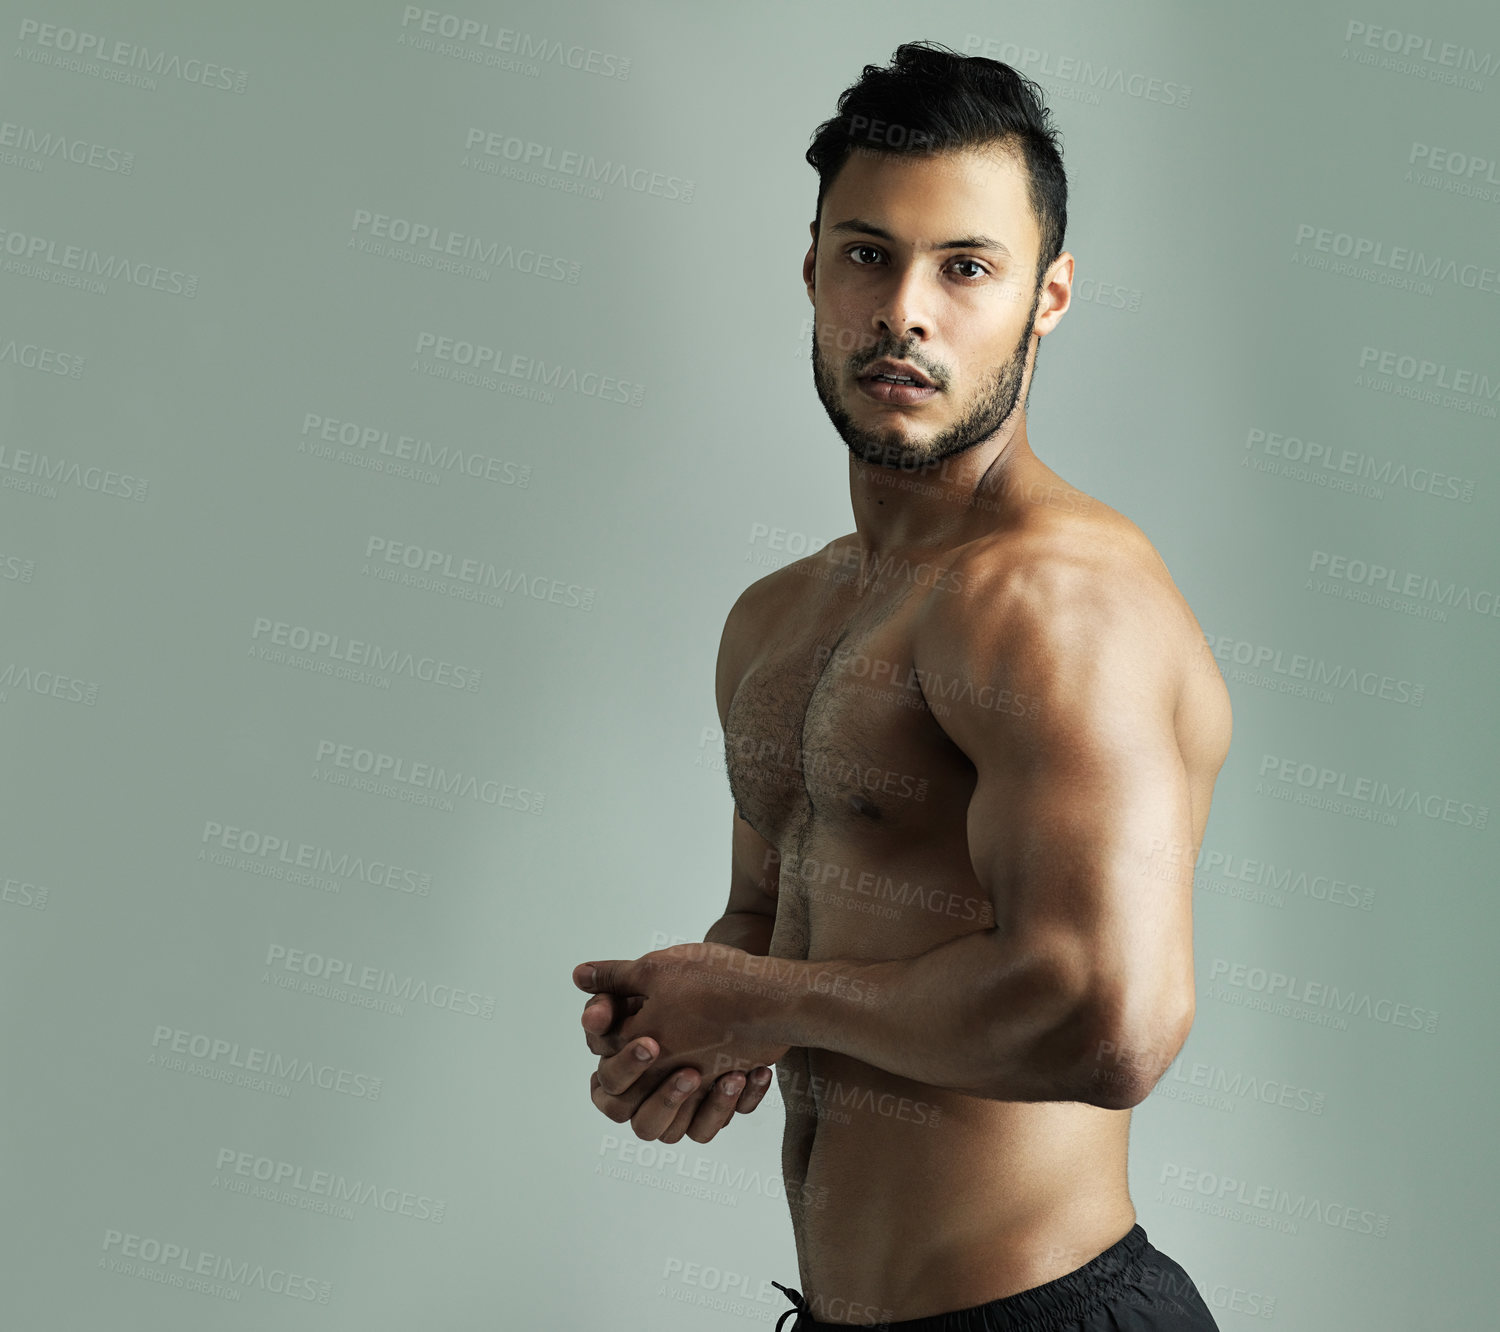 Buy stock photo Studio shot of an athletic young man flexing his muscles against a gray background